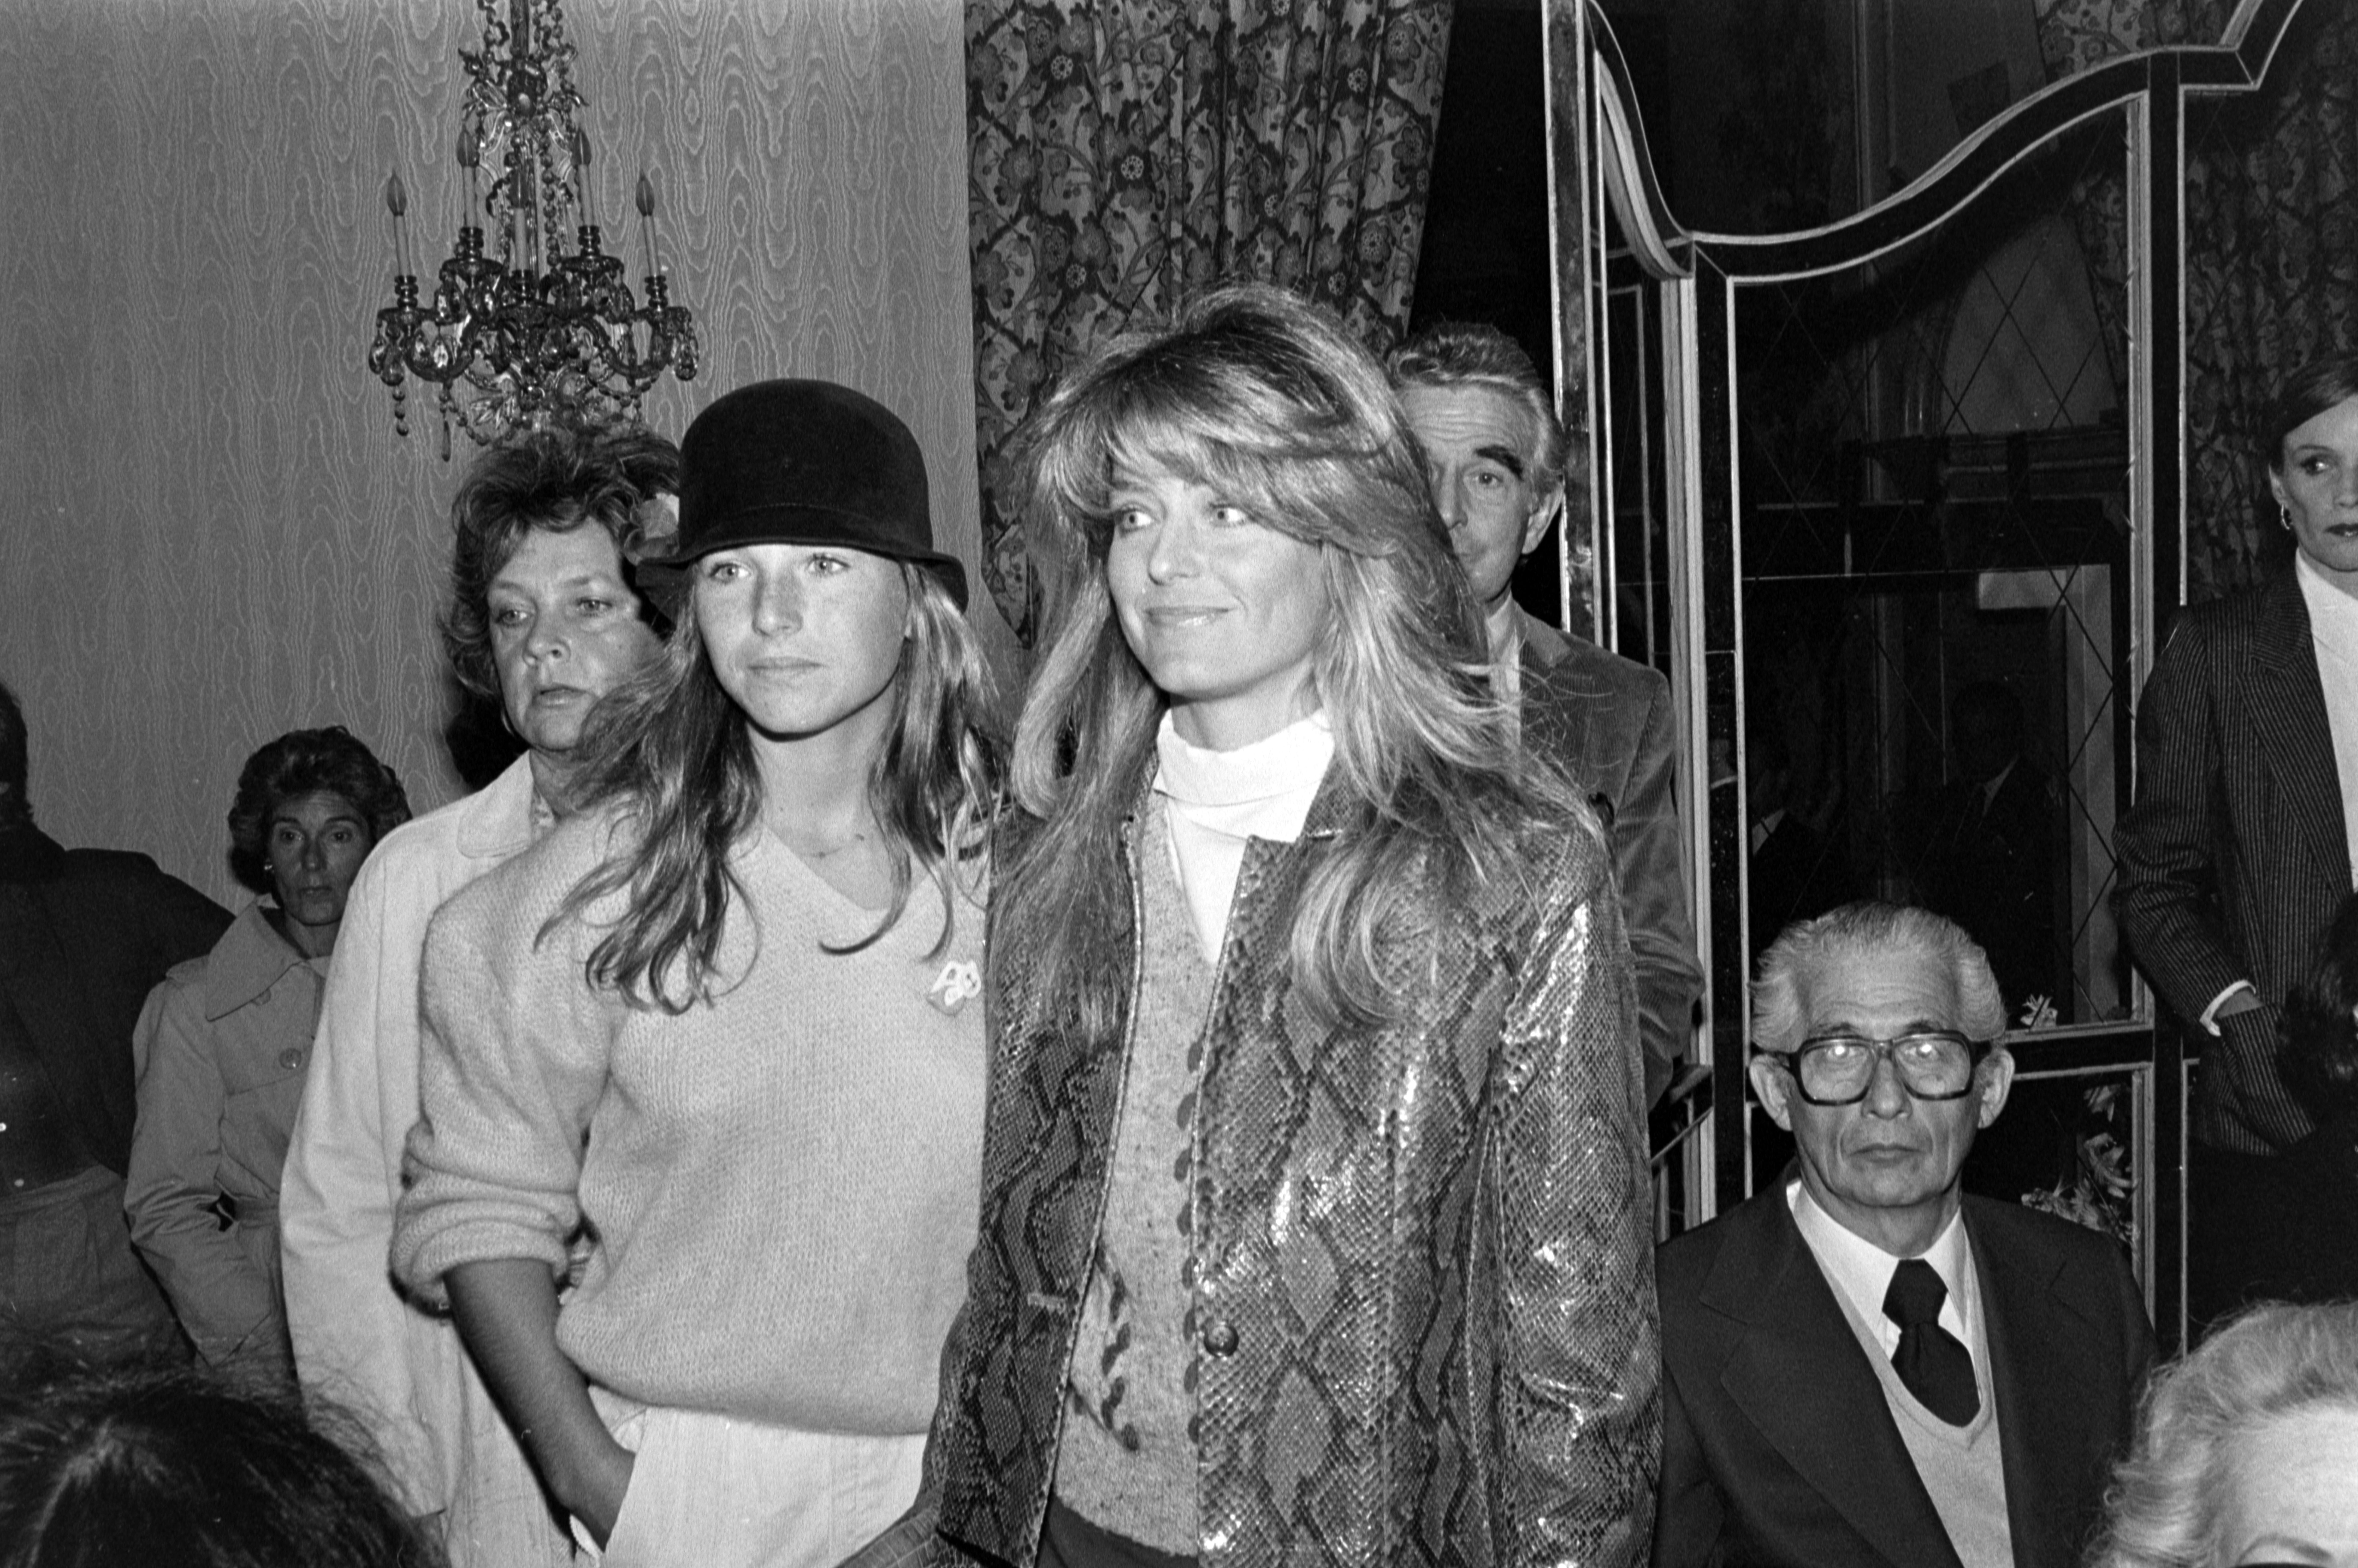 Tatum O'Neal and Farrah Fawcett at the Bill Blass Spring Ready to Wear Runway Show on November 3, 1980 | Source: Getty Images